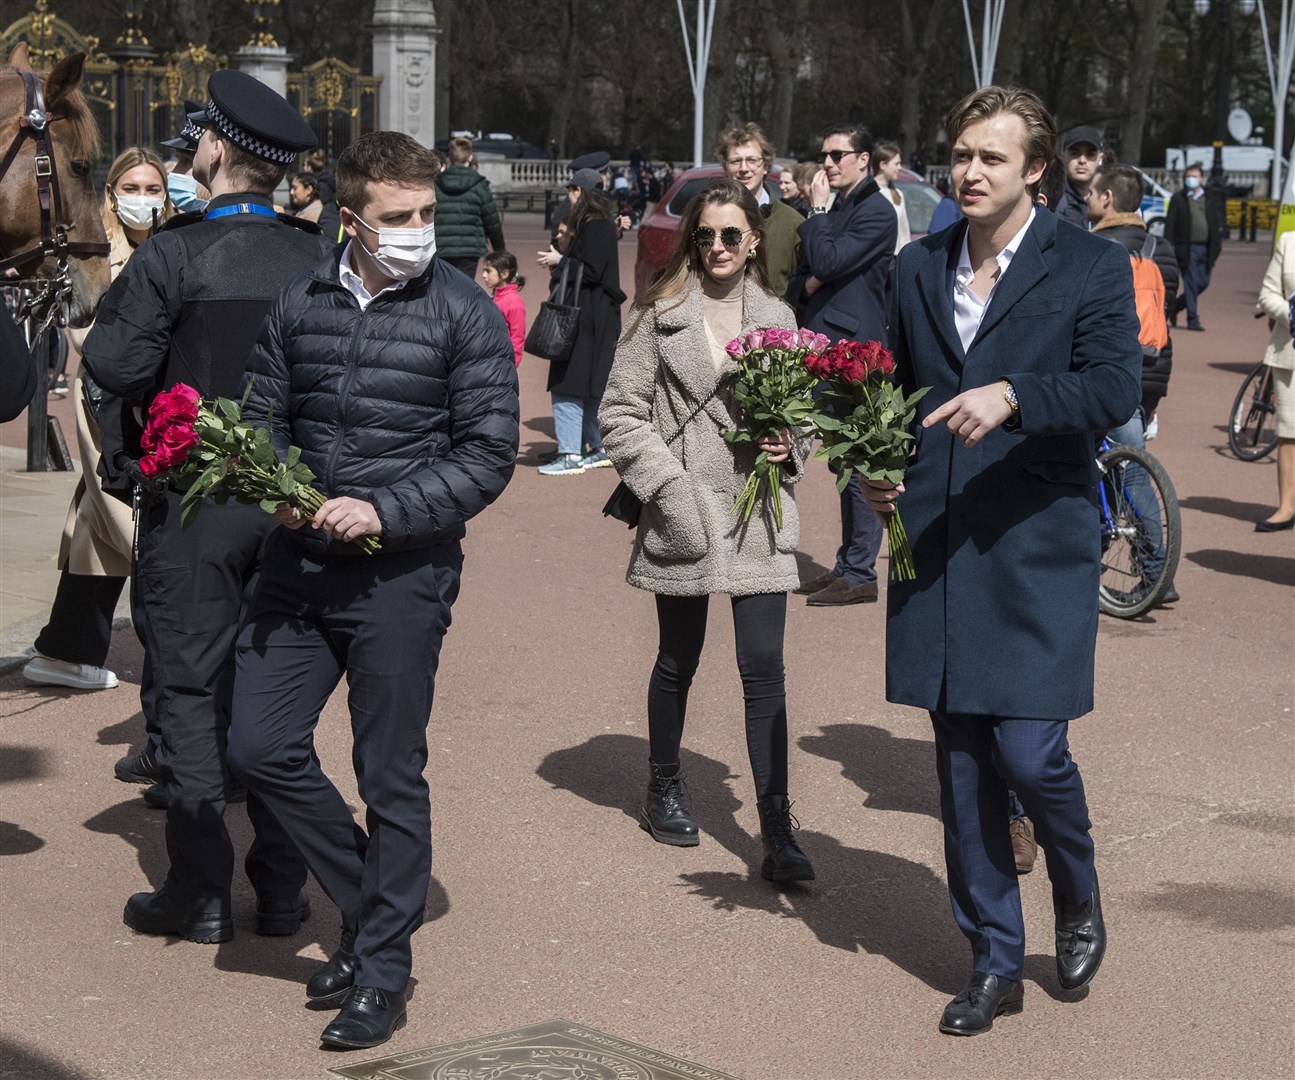 Members of the public carry flowers to leave at the gates of Buckingham Palace (Ian West/PA)